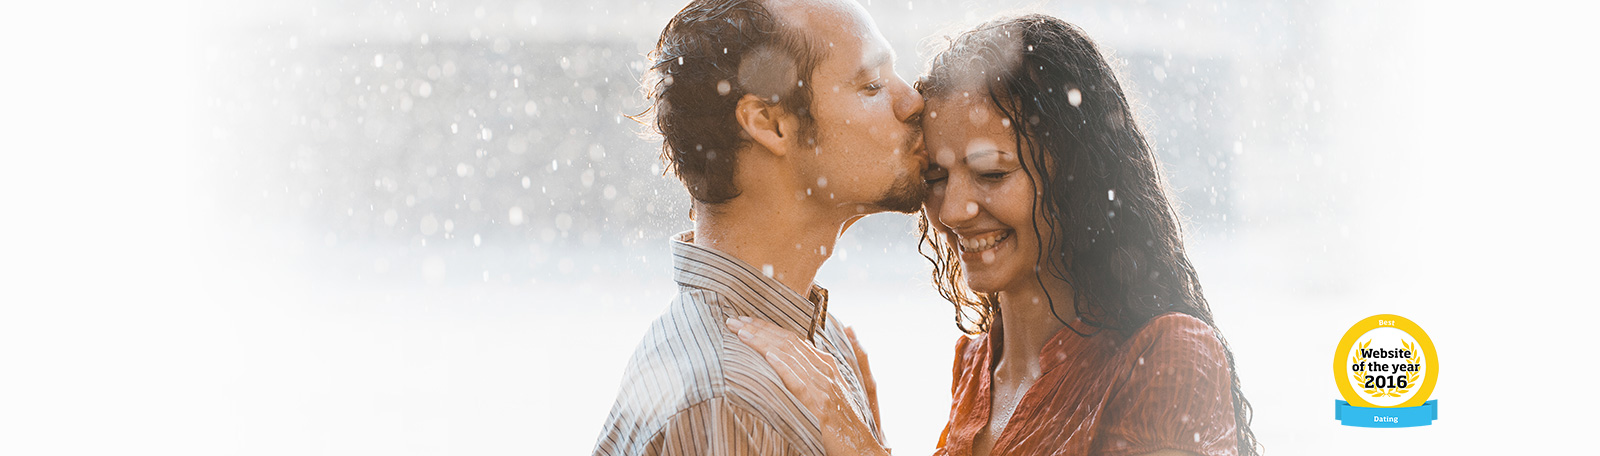 man and woman kissing in the rain